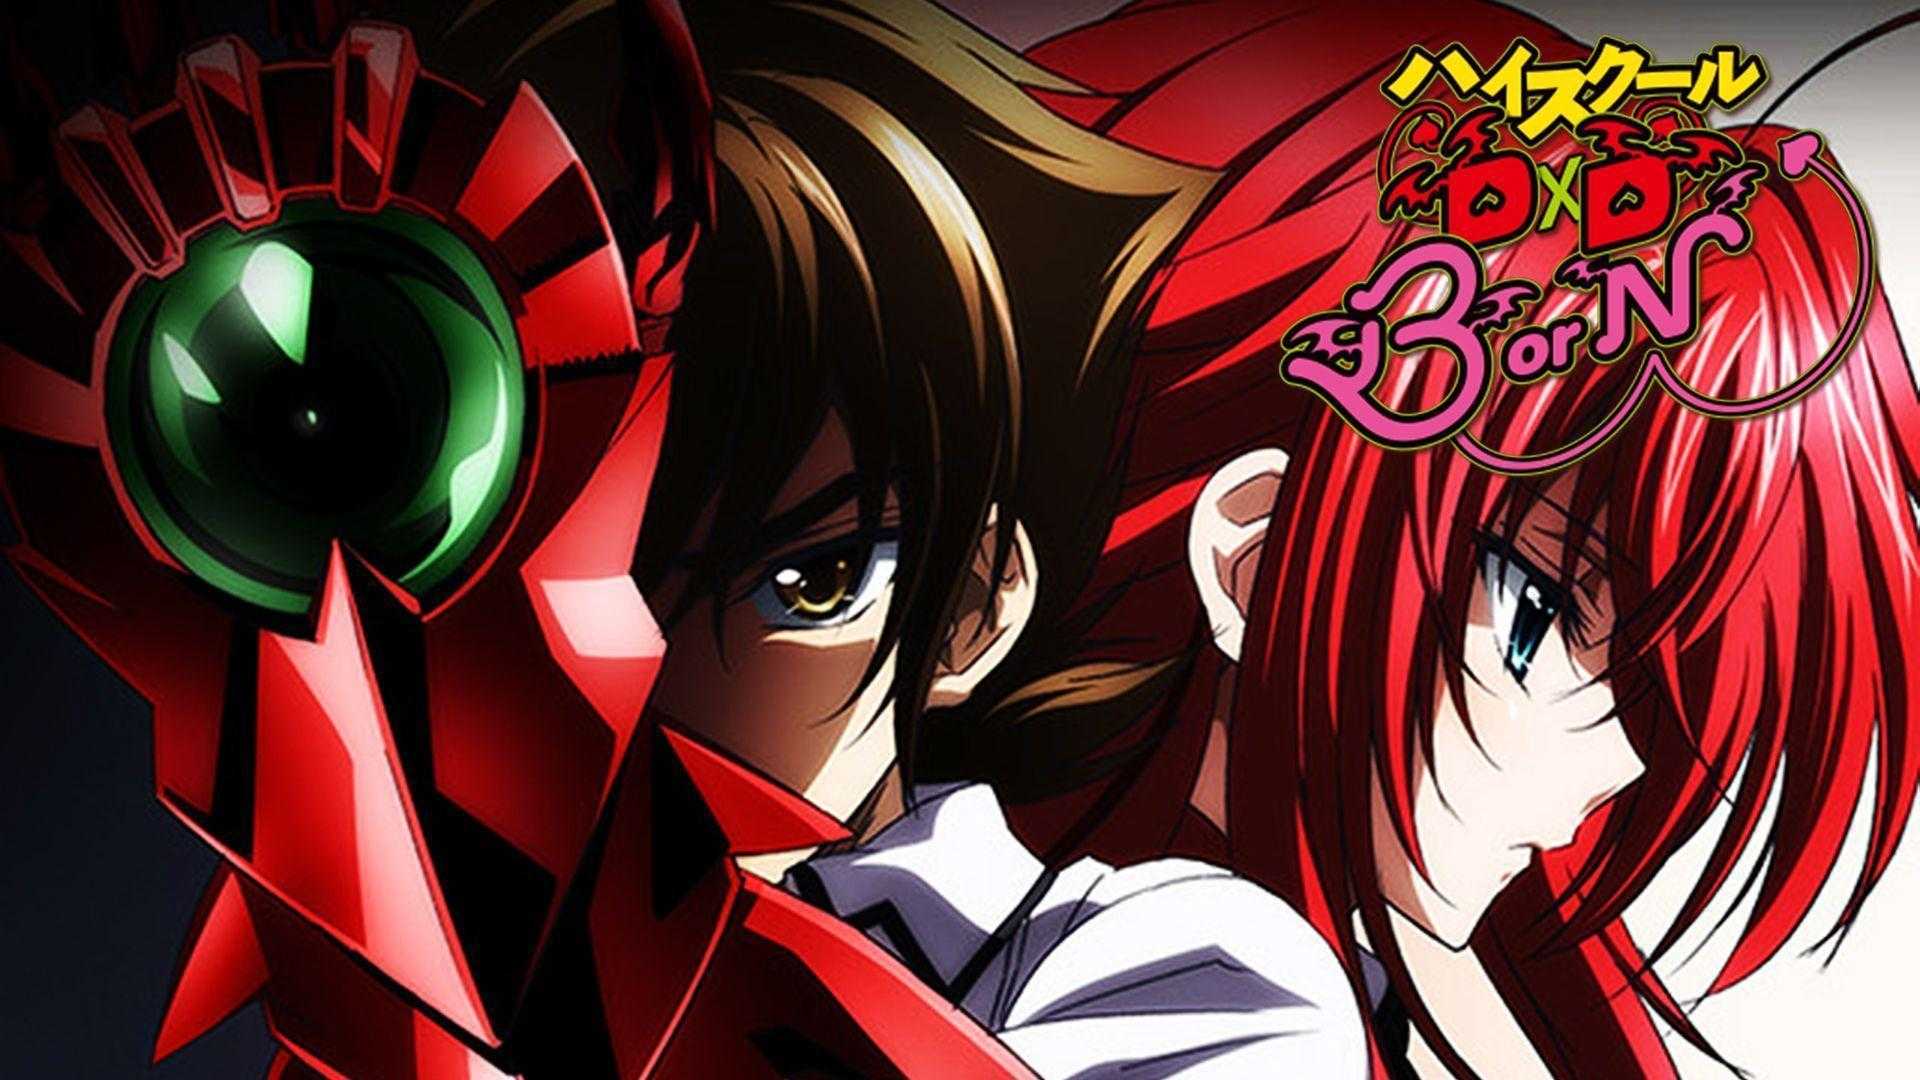 Free Download High School Dxd Wallpaper Image Group 45 19x1080 For Your Desktop Mobile Tablet Explore 25 High School Dxd 4k Wallpapers High School Dxd 4k Wallpapers High School